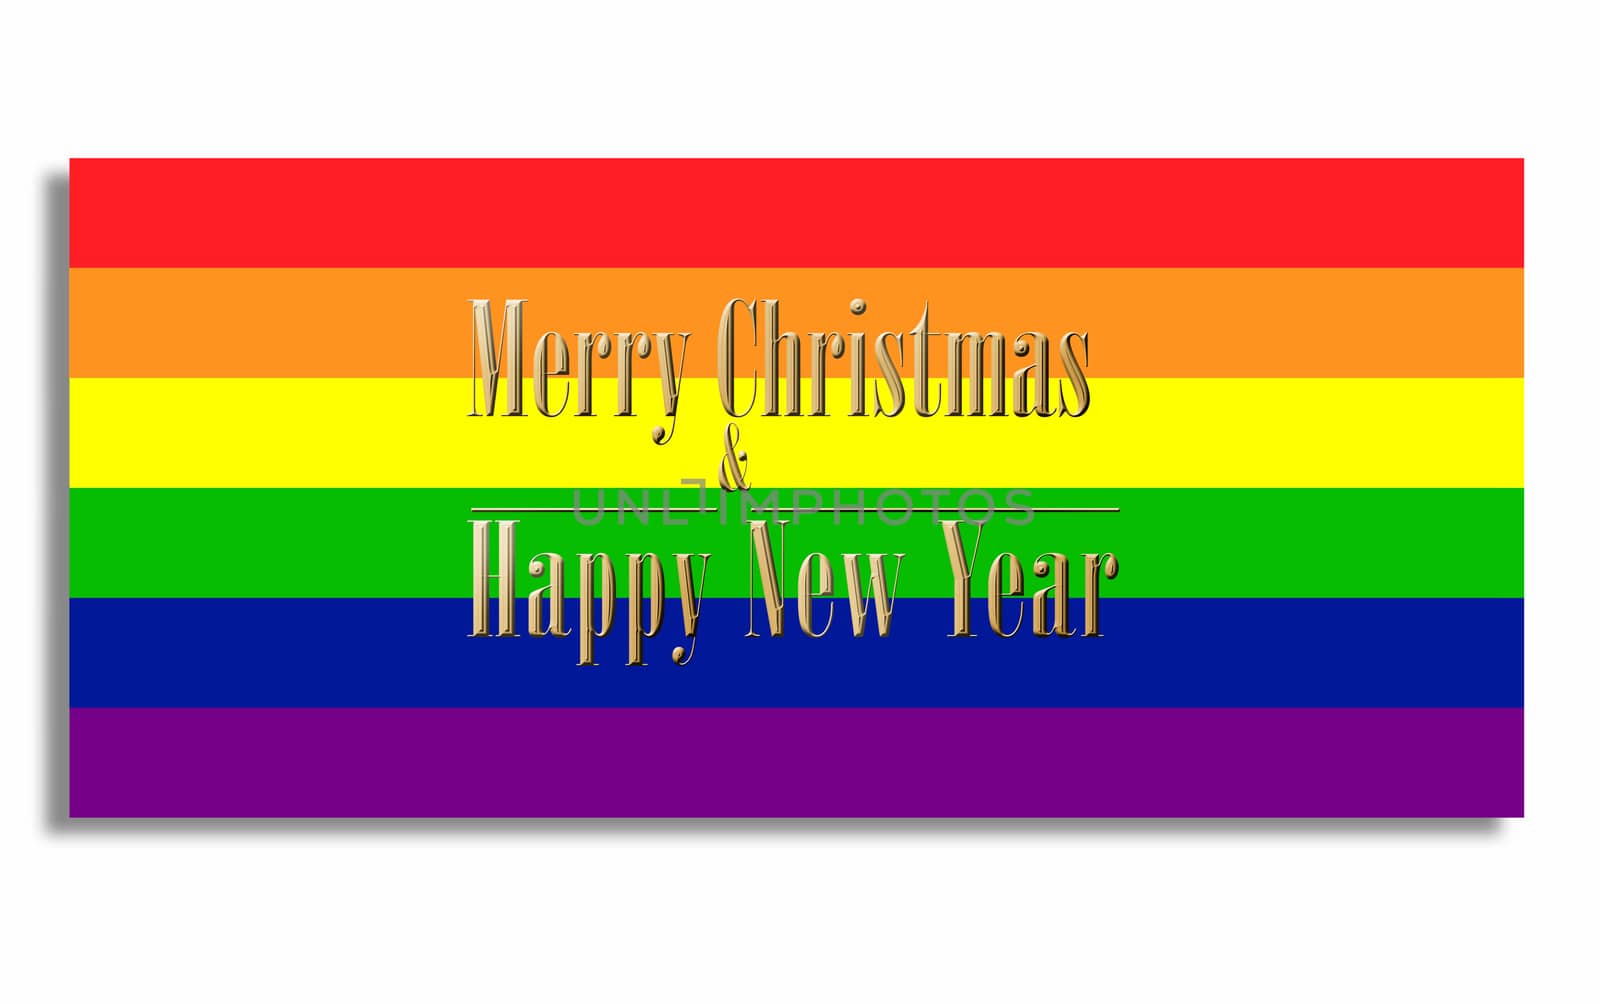 New Year Merry ChristmasLGBT concept by NelliPolk